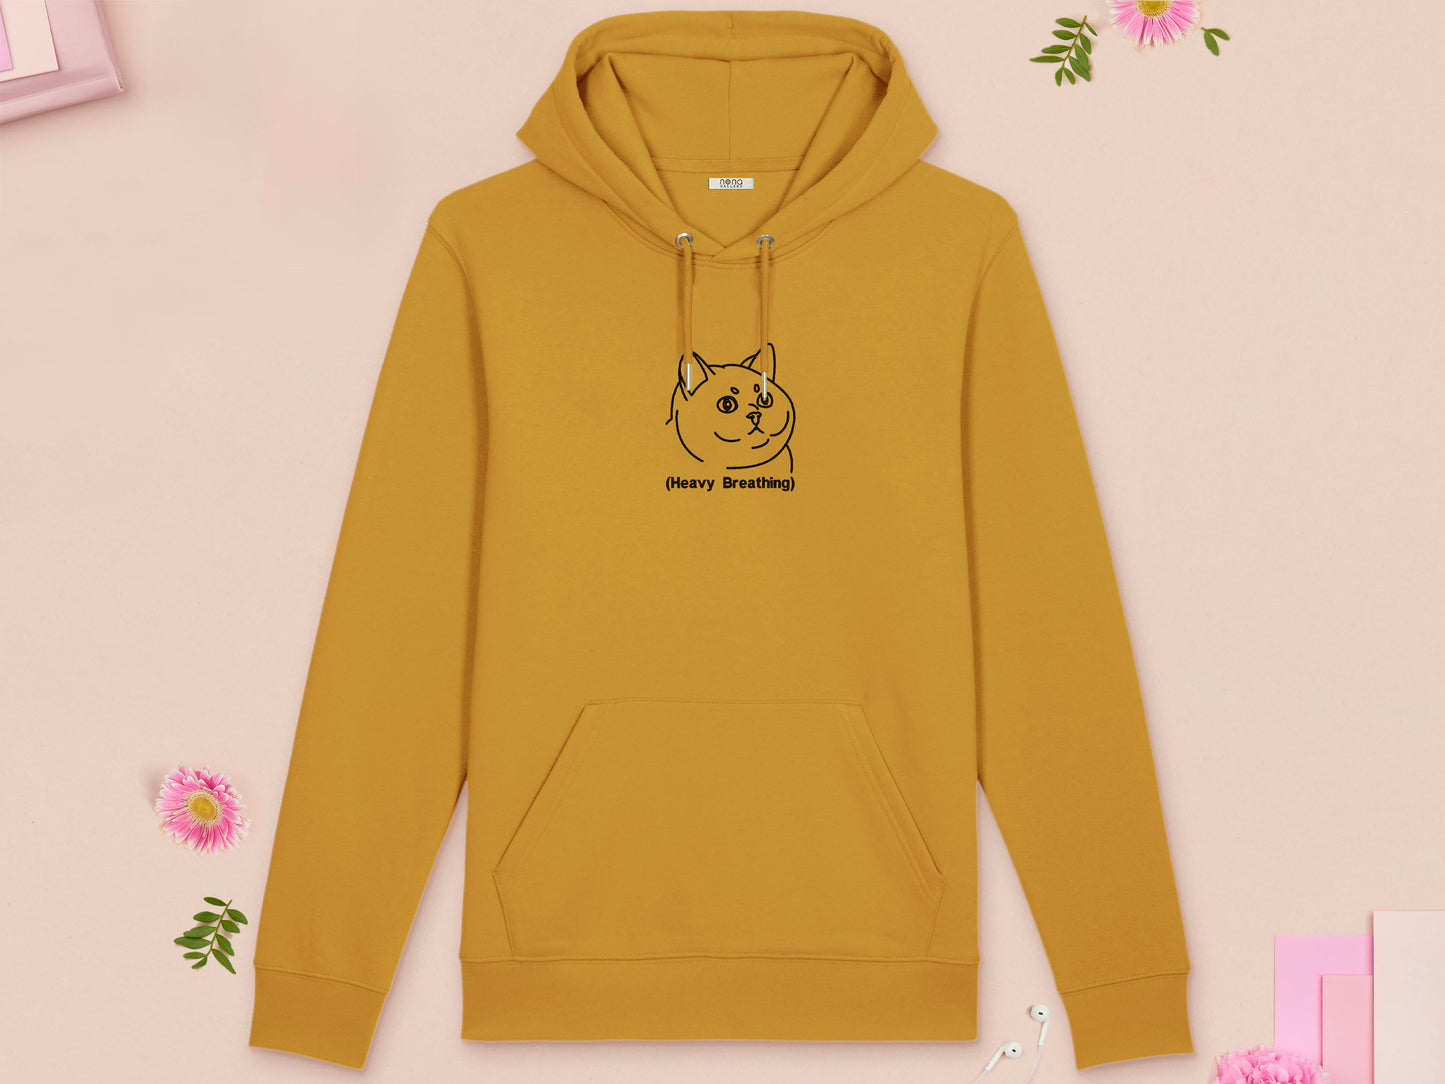 A yellow long sleeve fleece hoodie, with an embroidered black thread design of cute fat cat portrait with text underneath saying (Heavy Breathing)